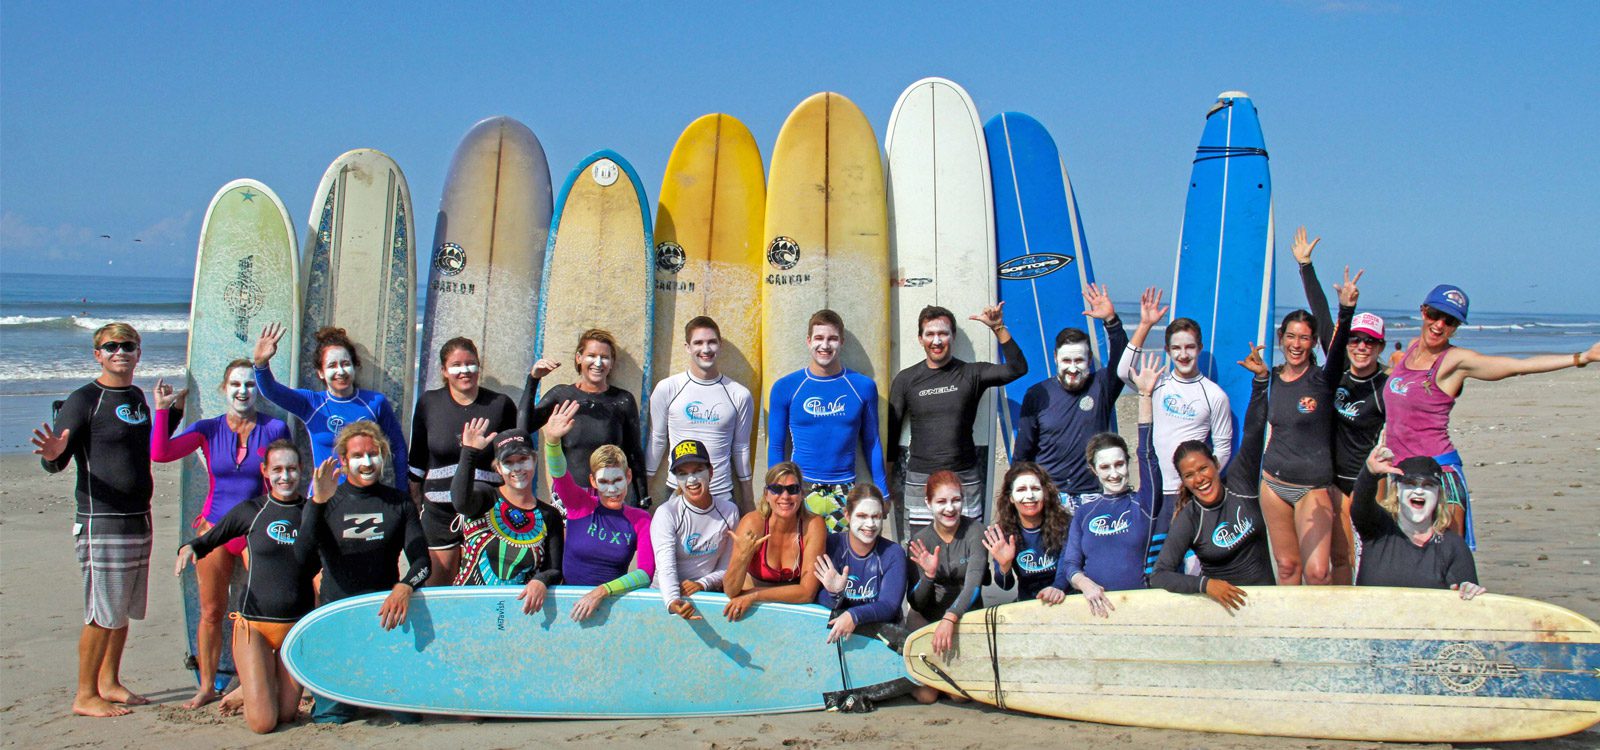 Group Picture Taking at Costa Rica Surf Camp